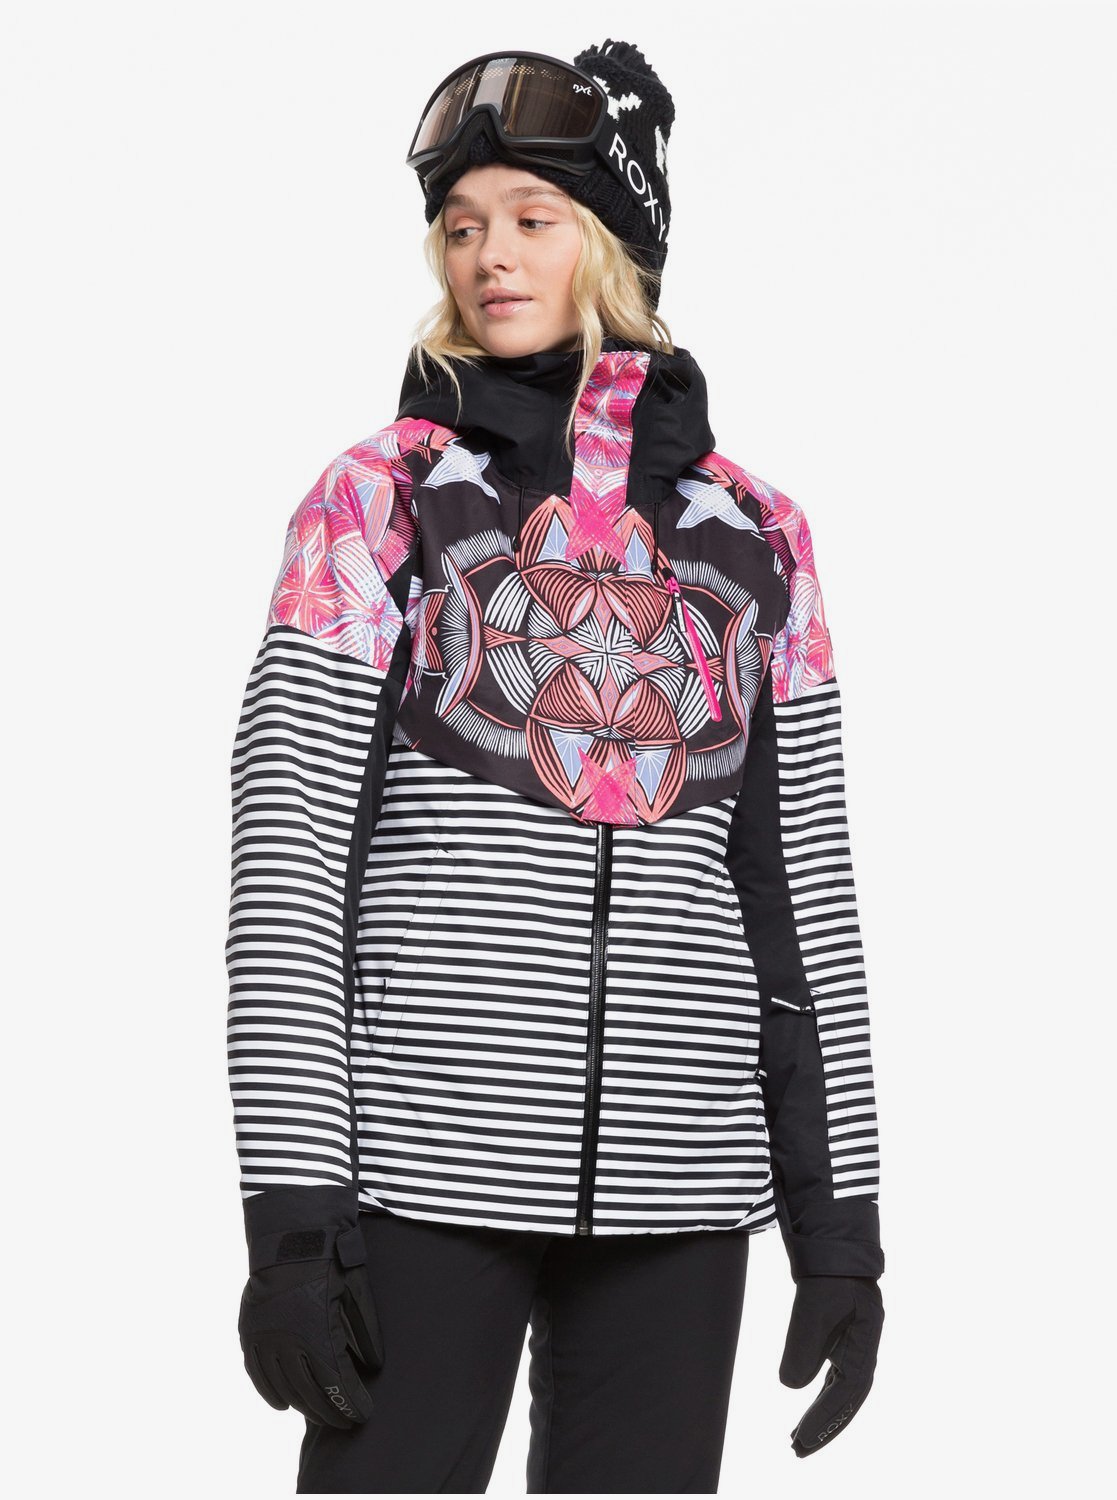 ROXY Women's Frozen Flow Ski and Snowboard Jacket Modeled Front View